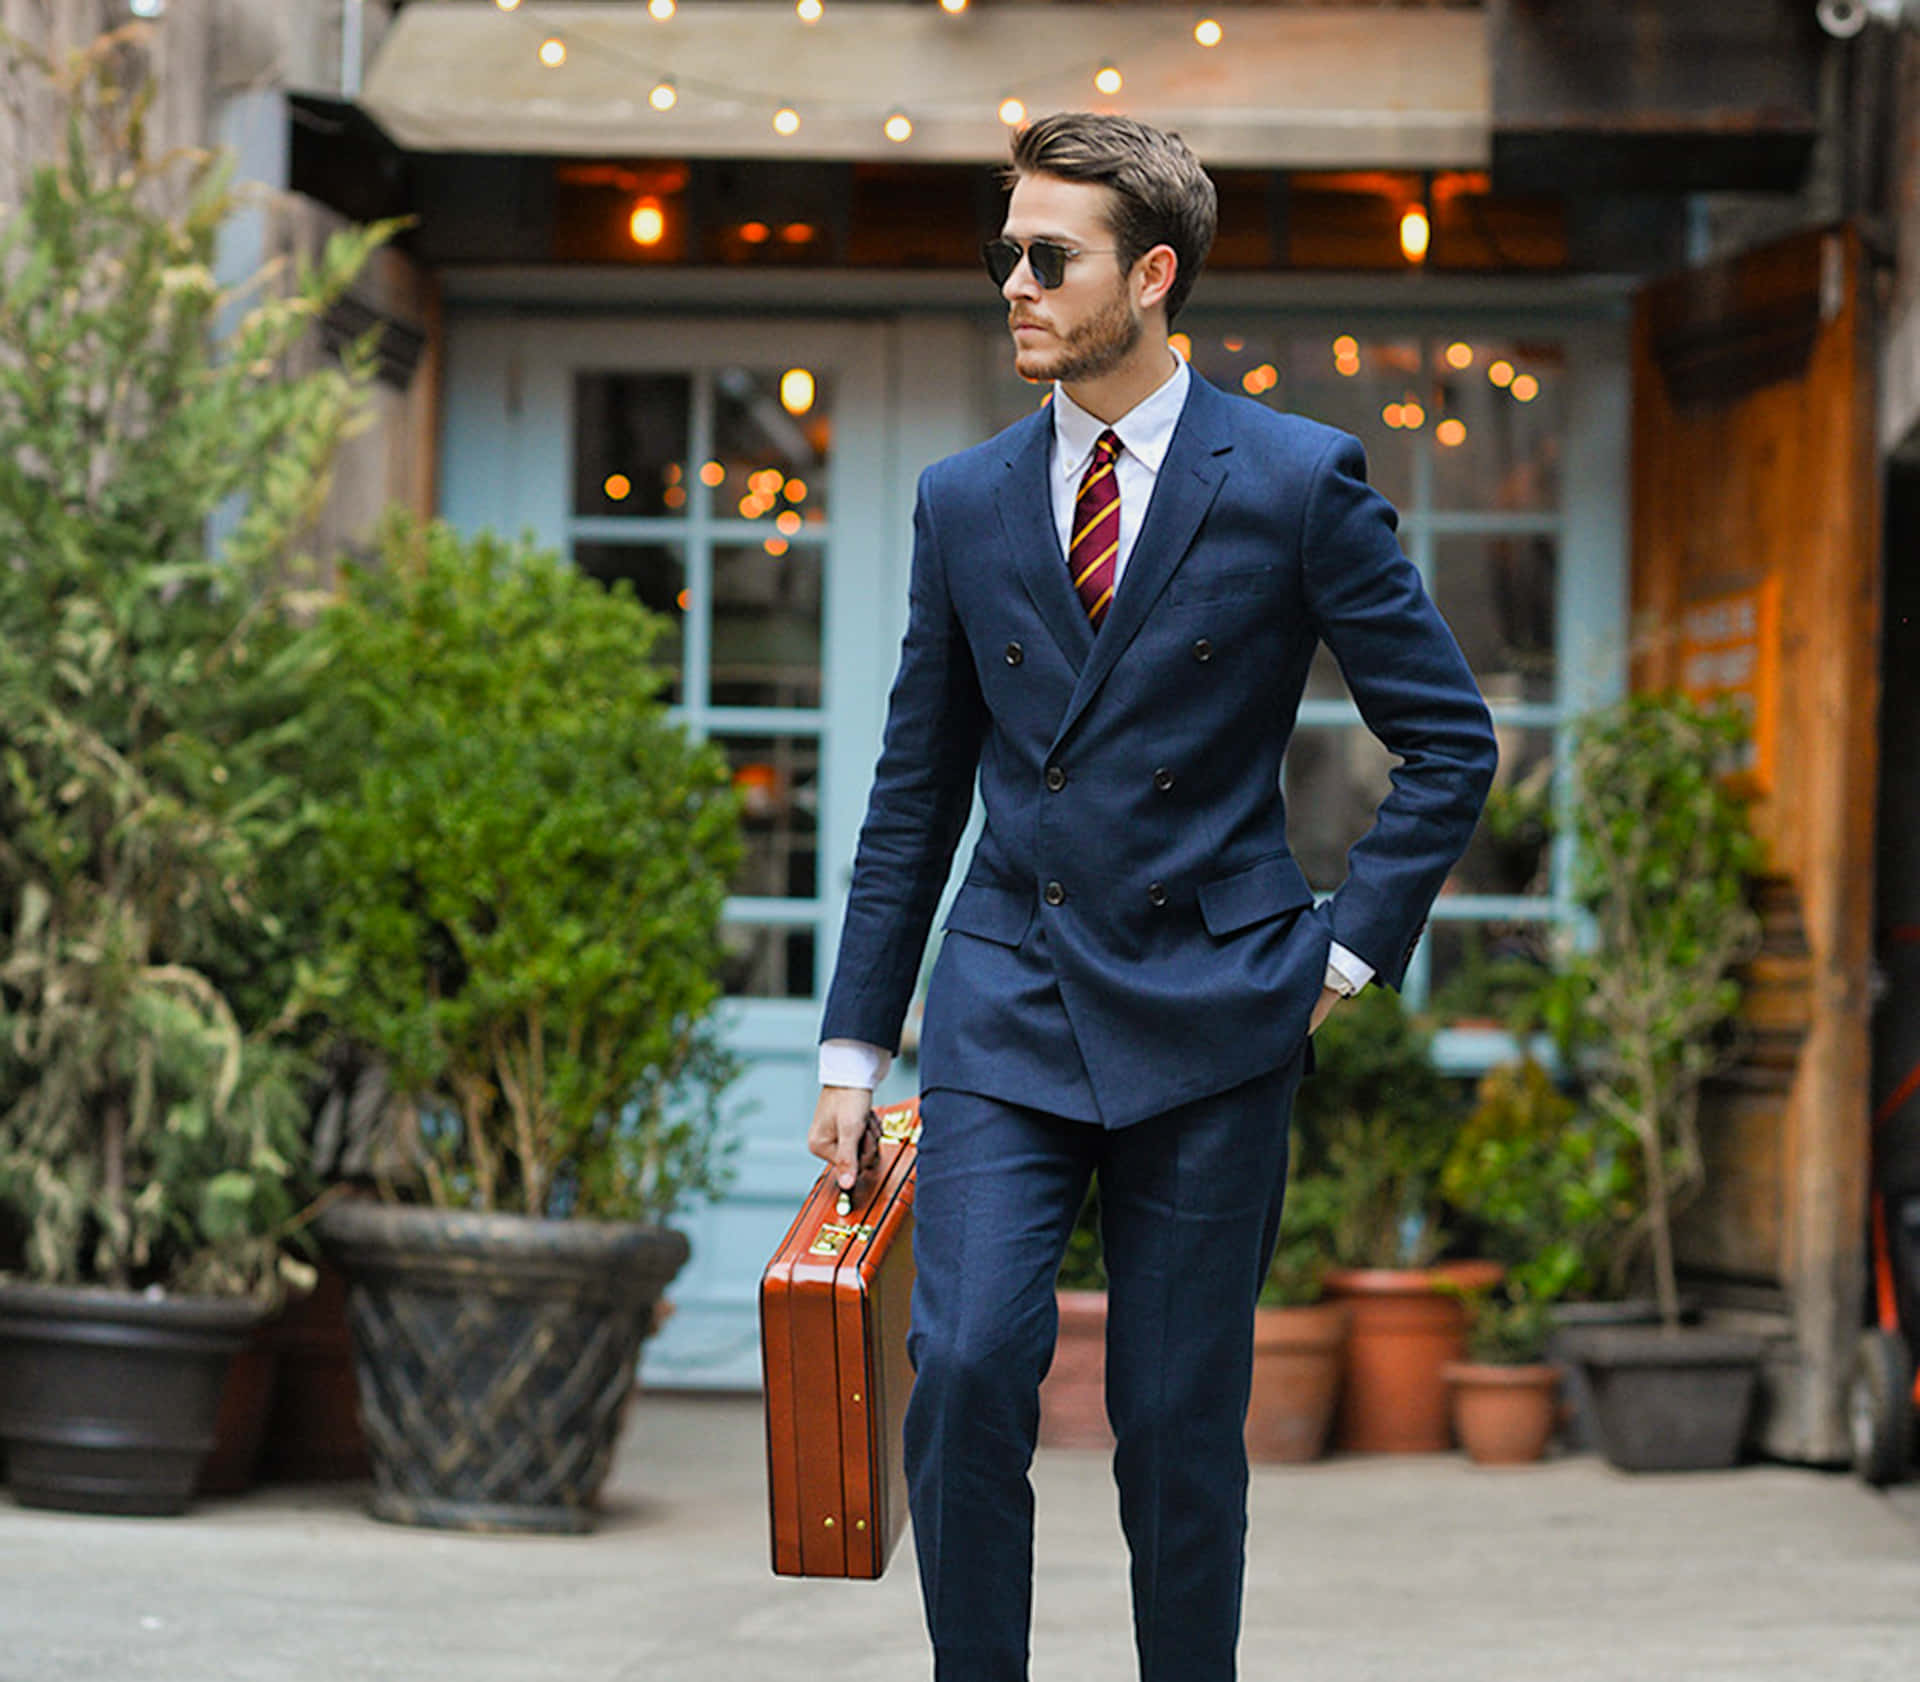 Impeccably dressed